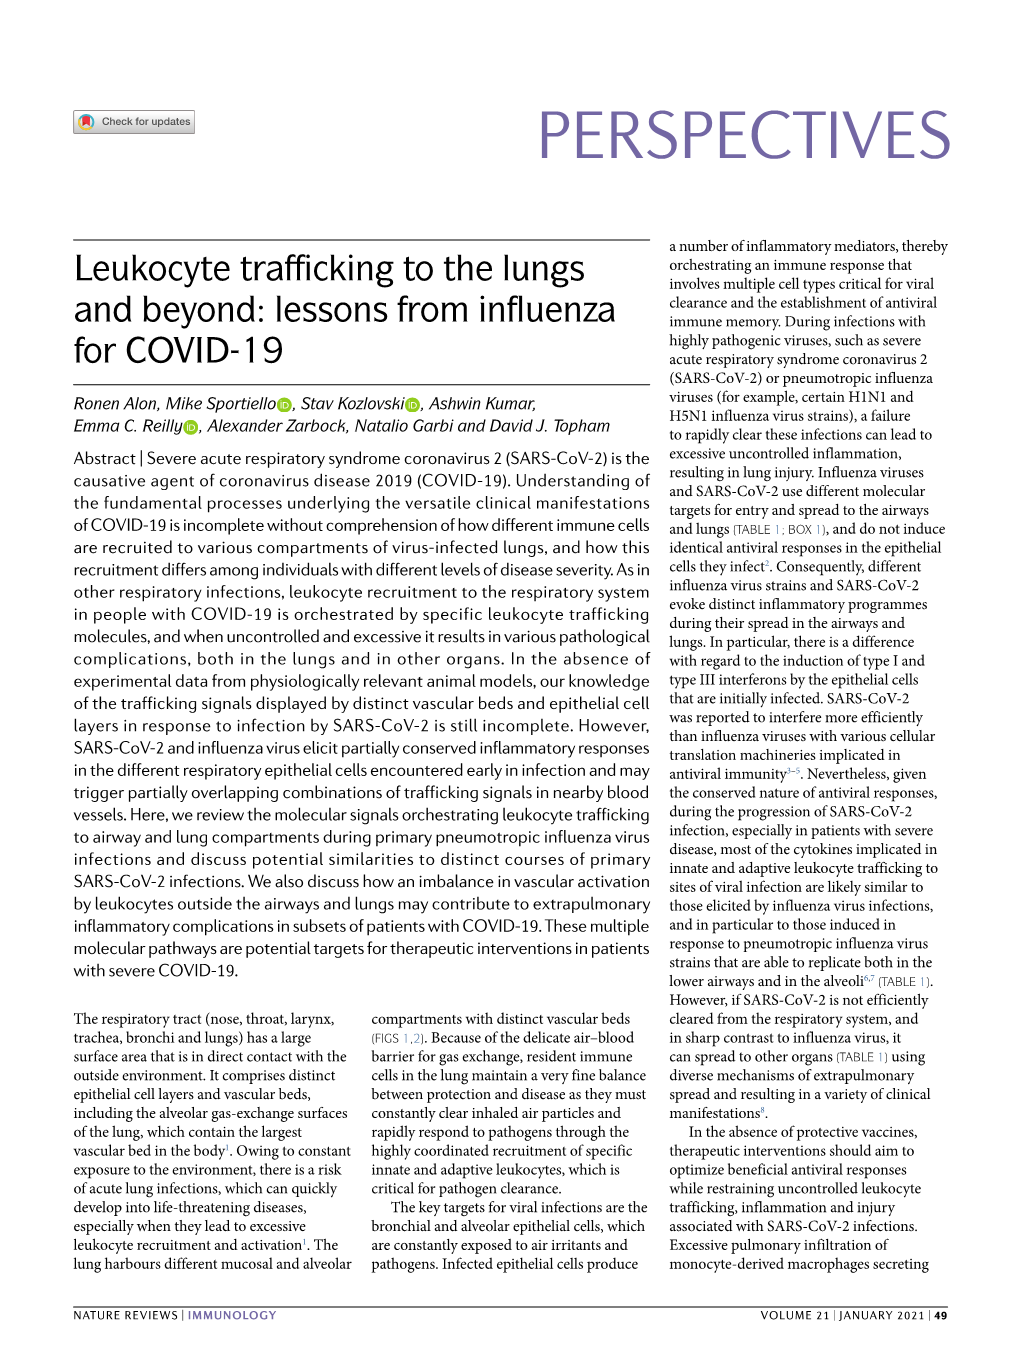 Leukocyte Trafficking to the Lungs and Beyond: Lessons from Influenza For